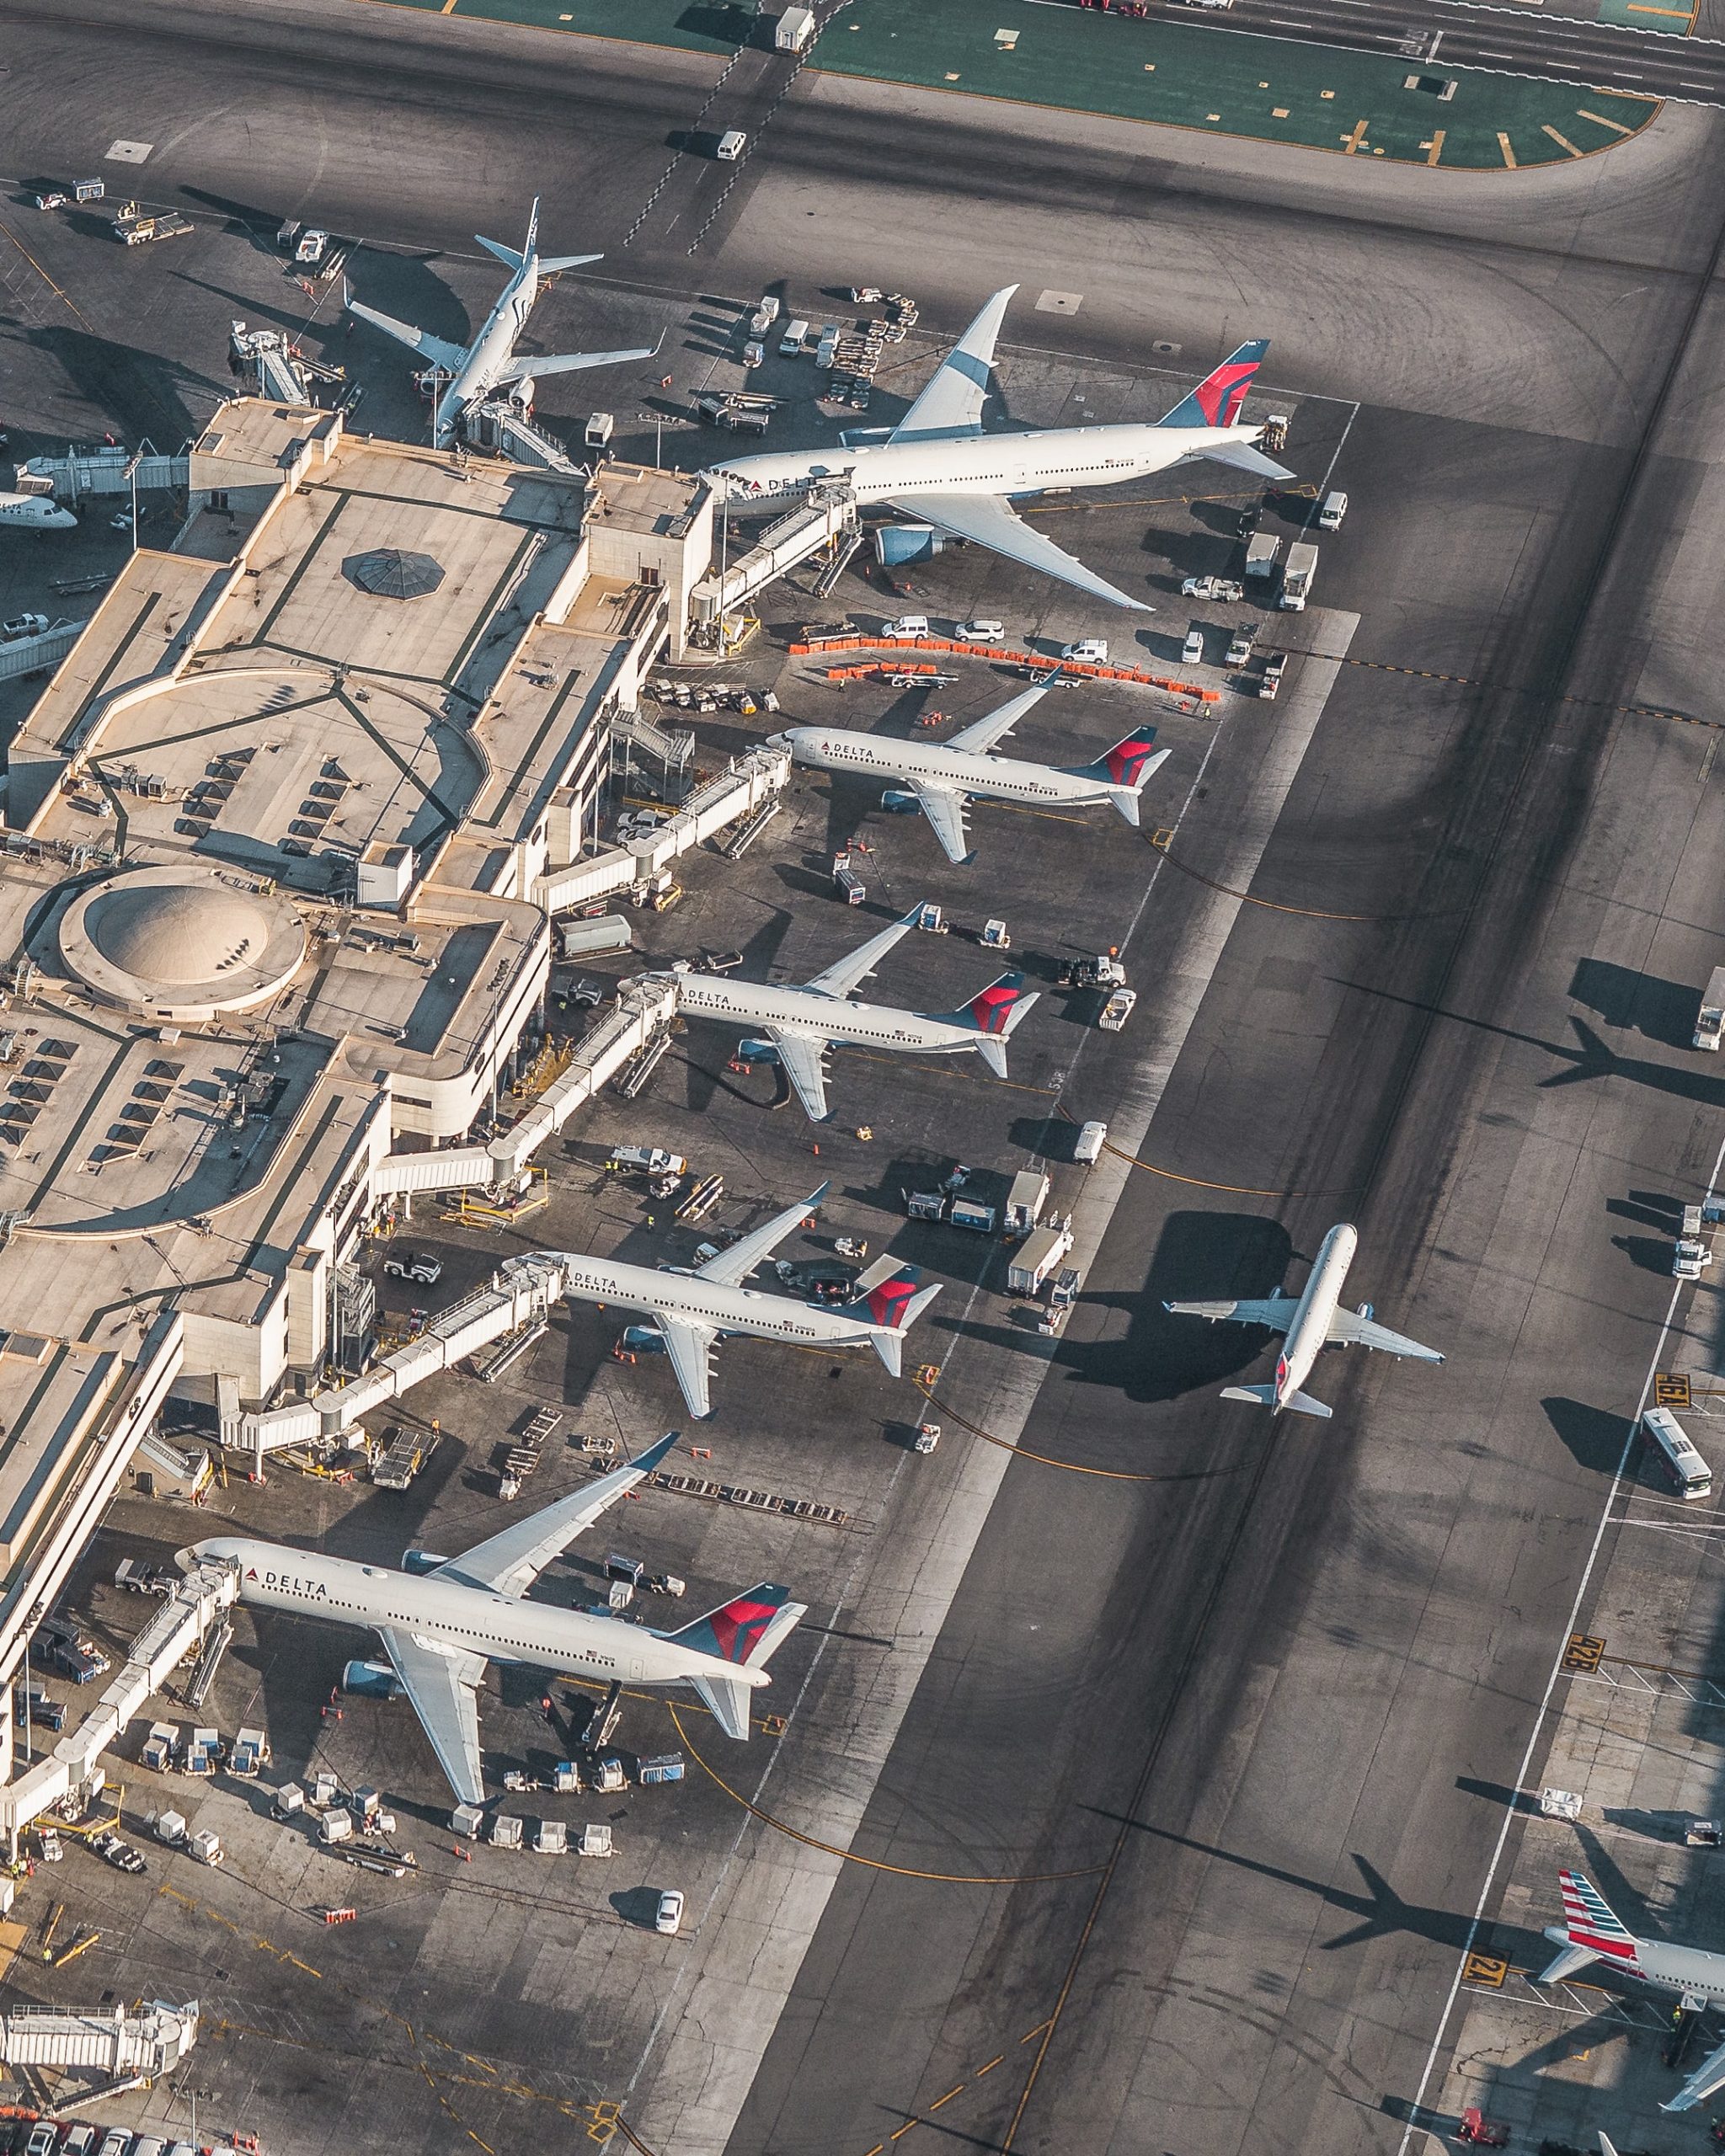 Busy airport